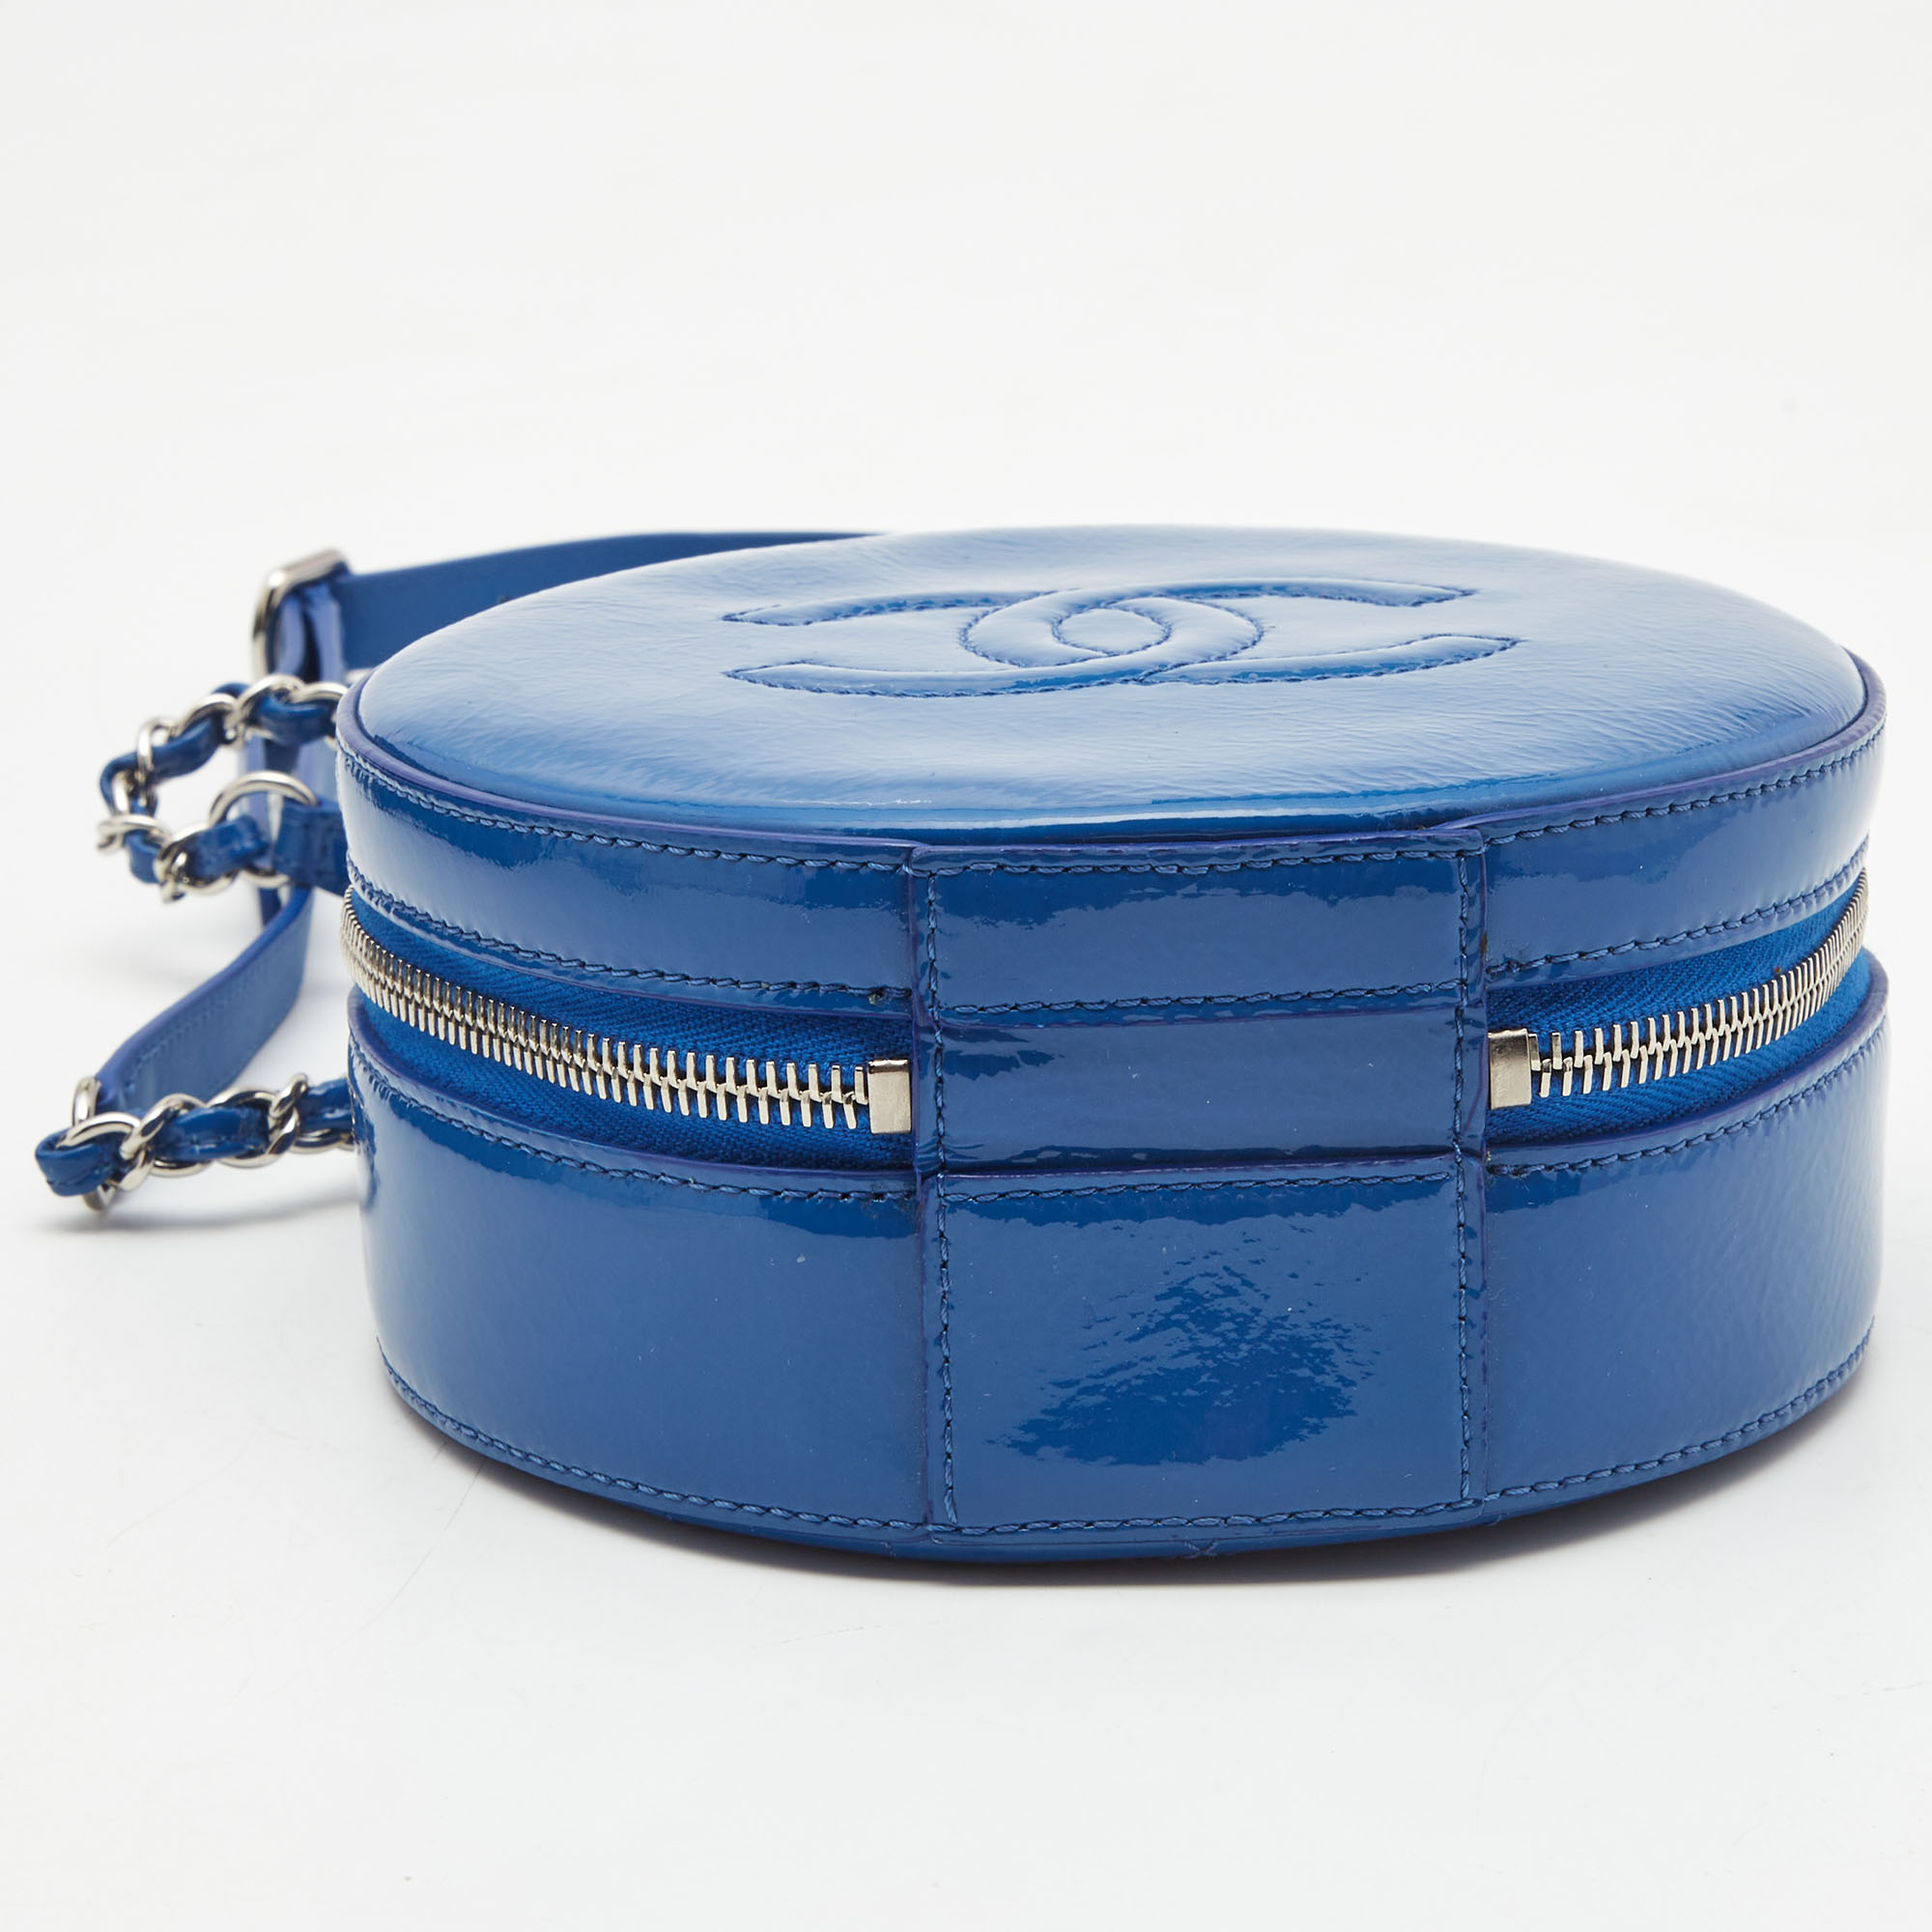 CHANEL Round as Earth Patent Leather Crossbody Bag Blue